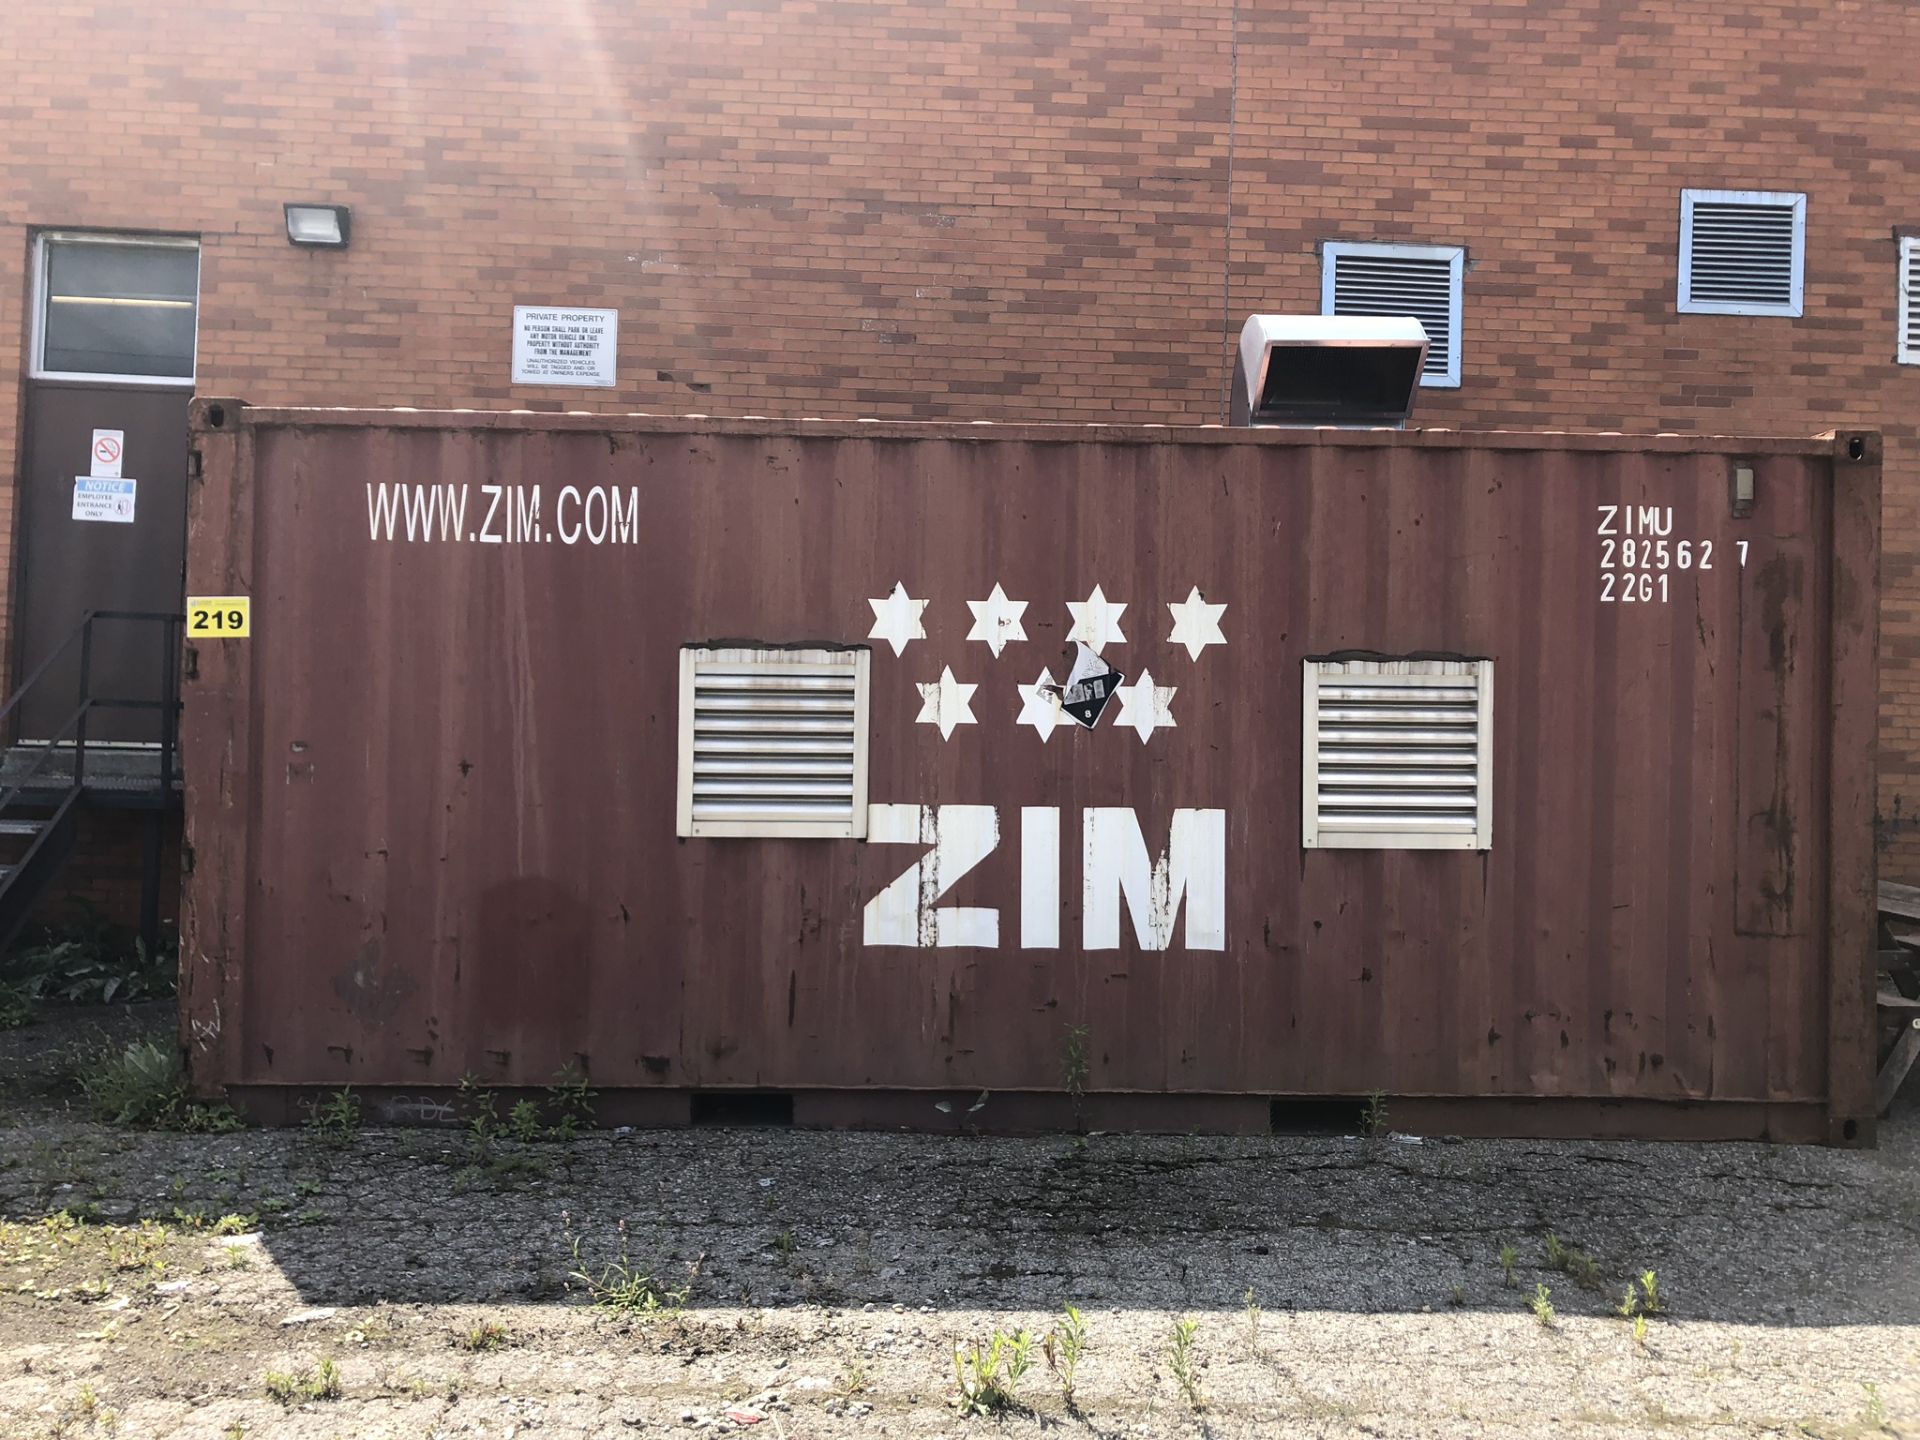 ZIM, 20' SEA CONTAINER) (CONTAINER IS CONNECTED TO ELECTRICAL. DISCONNECT FEE IS $200) - Image 2 of 4